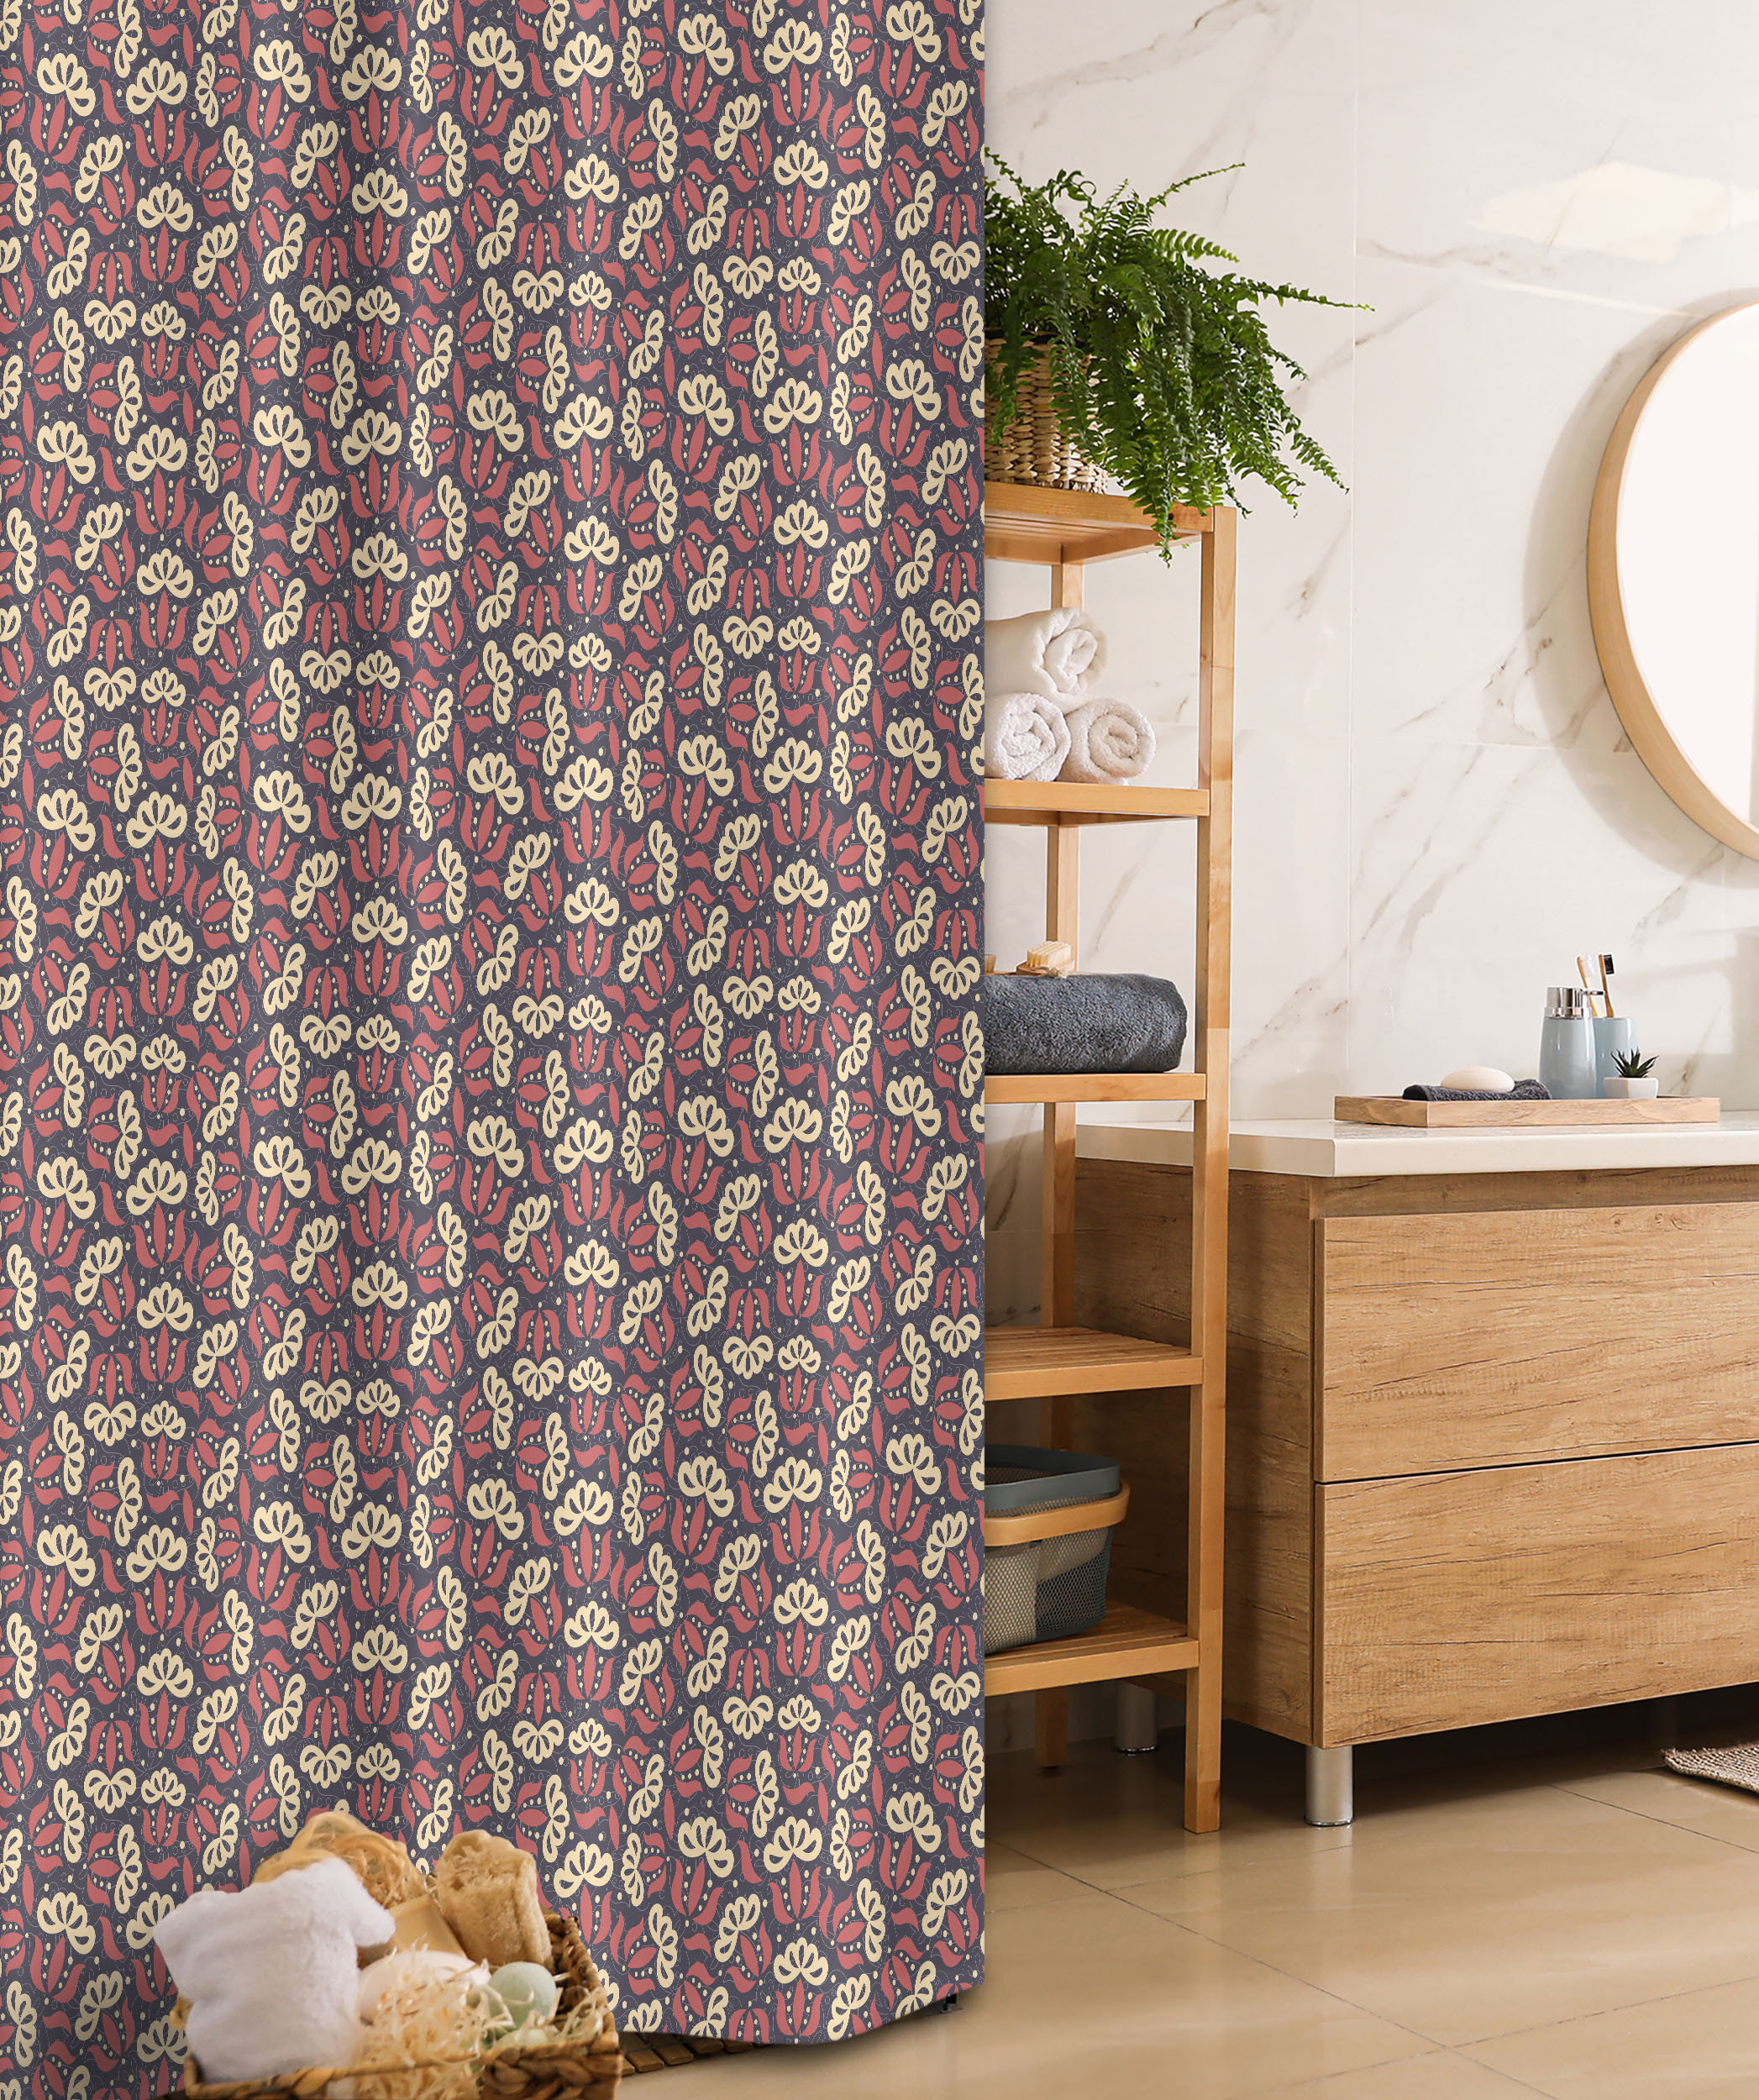 Bless international Kaleaha Paisley Shower Curtain with Hooks Included